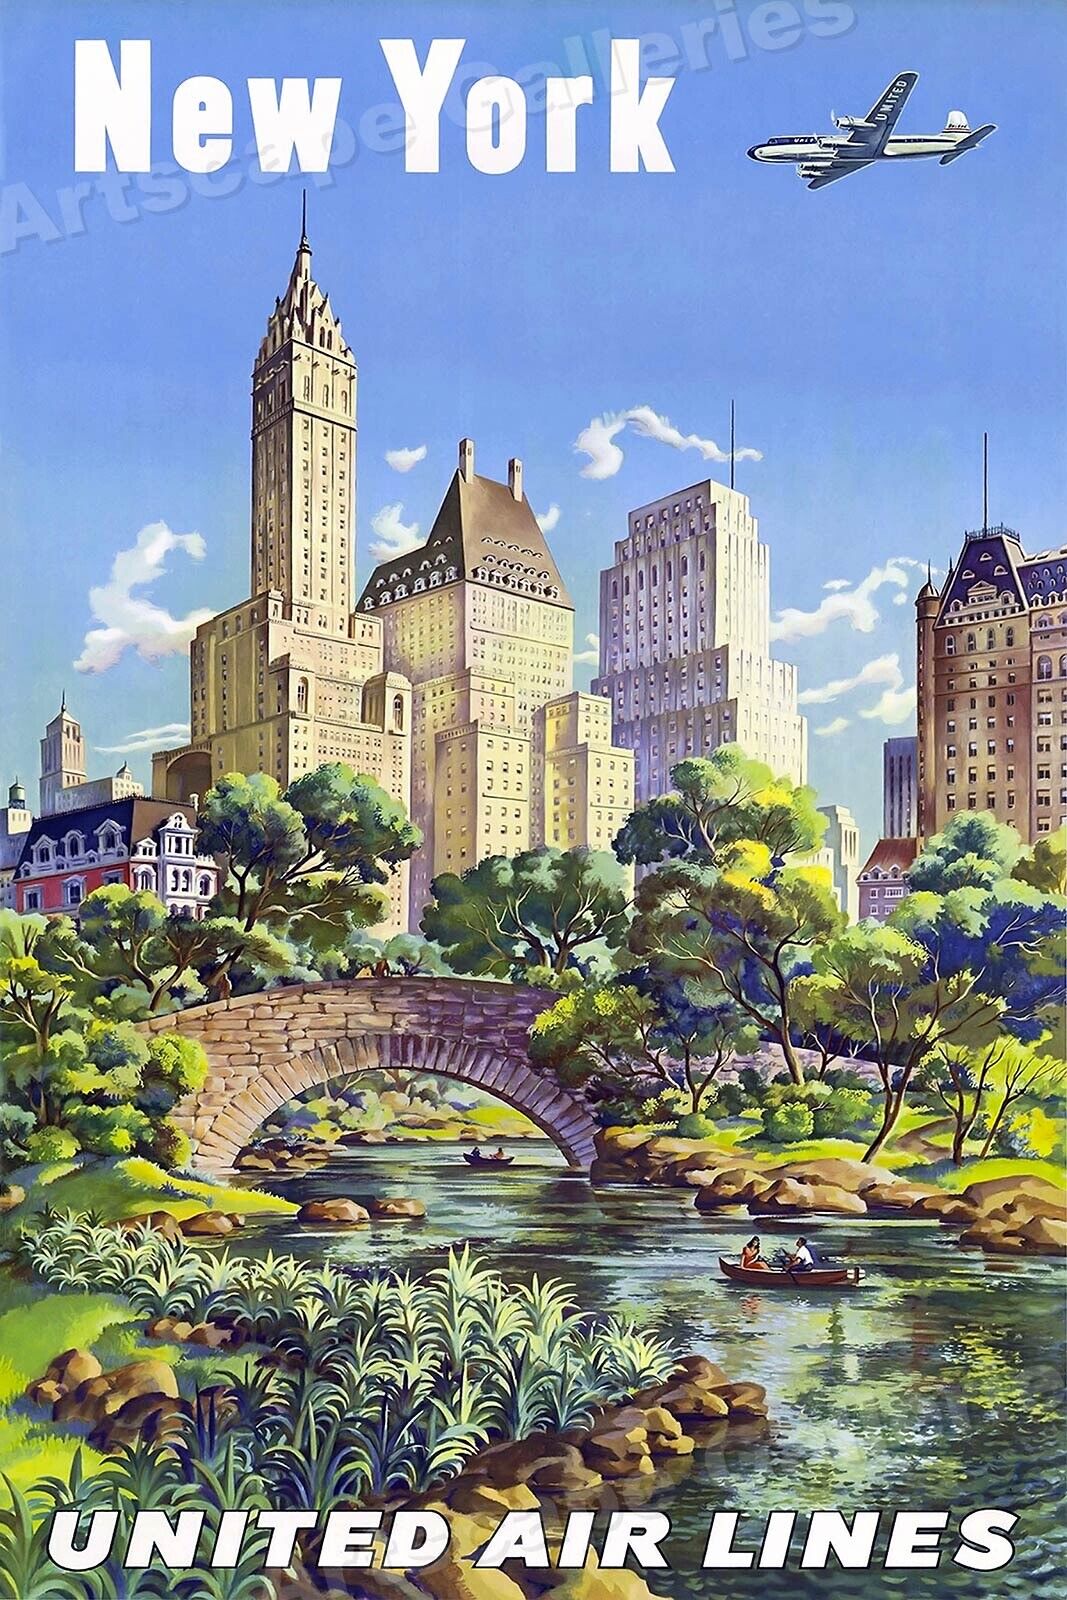 New York Classic 1950s Vintage Style Airline Travel Poster - 16x24